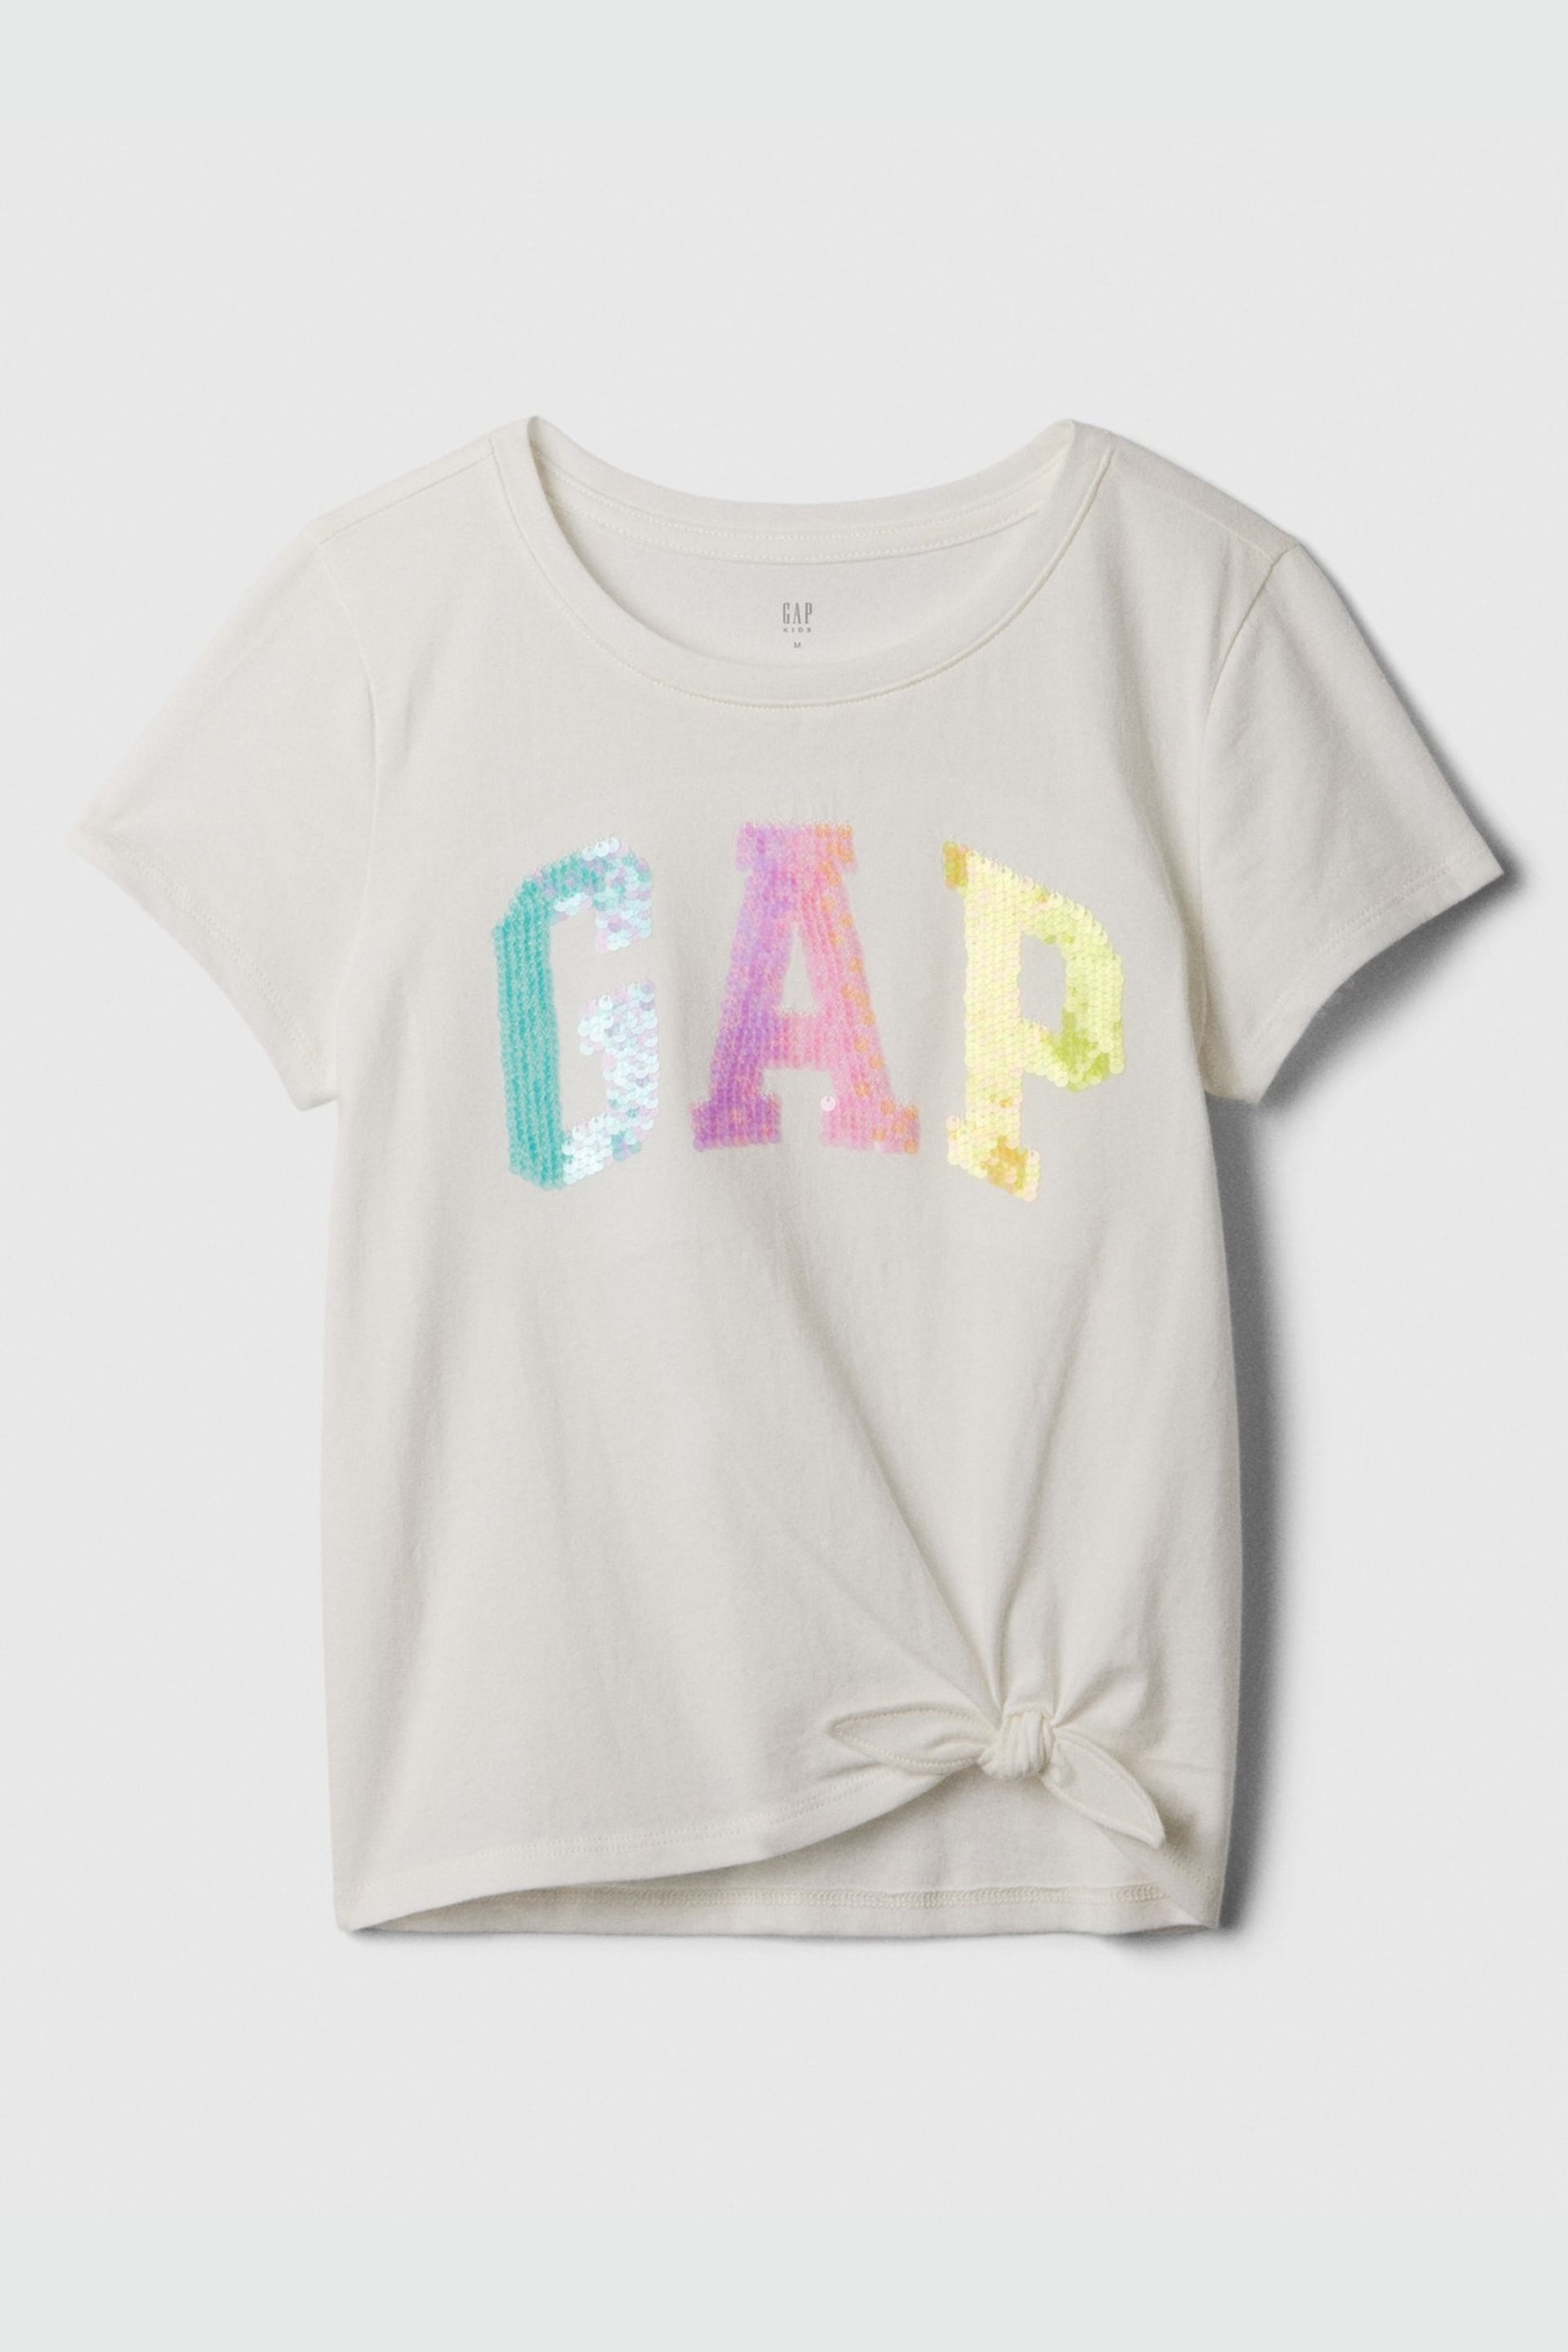 Gap White Sequin Logo Knot-Tie Short Sleeve Crew Neck T-Shirt (4-13yrs) - Image 1 of 1